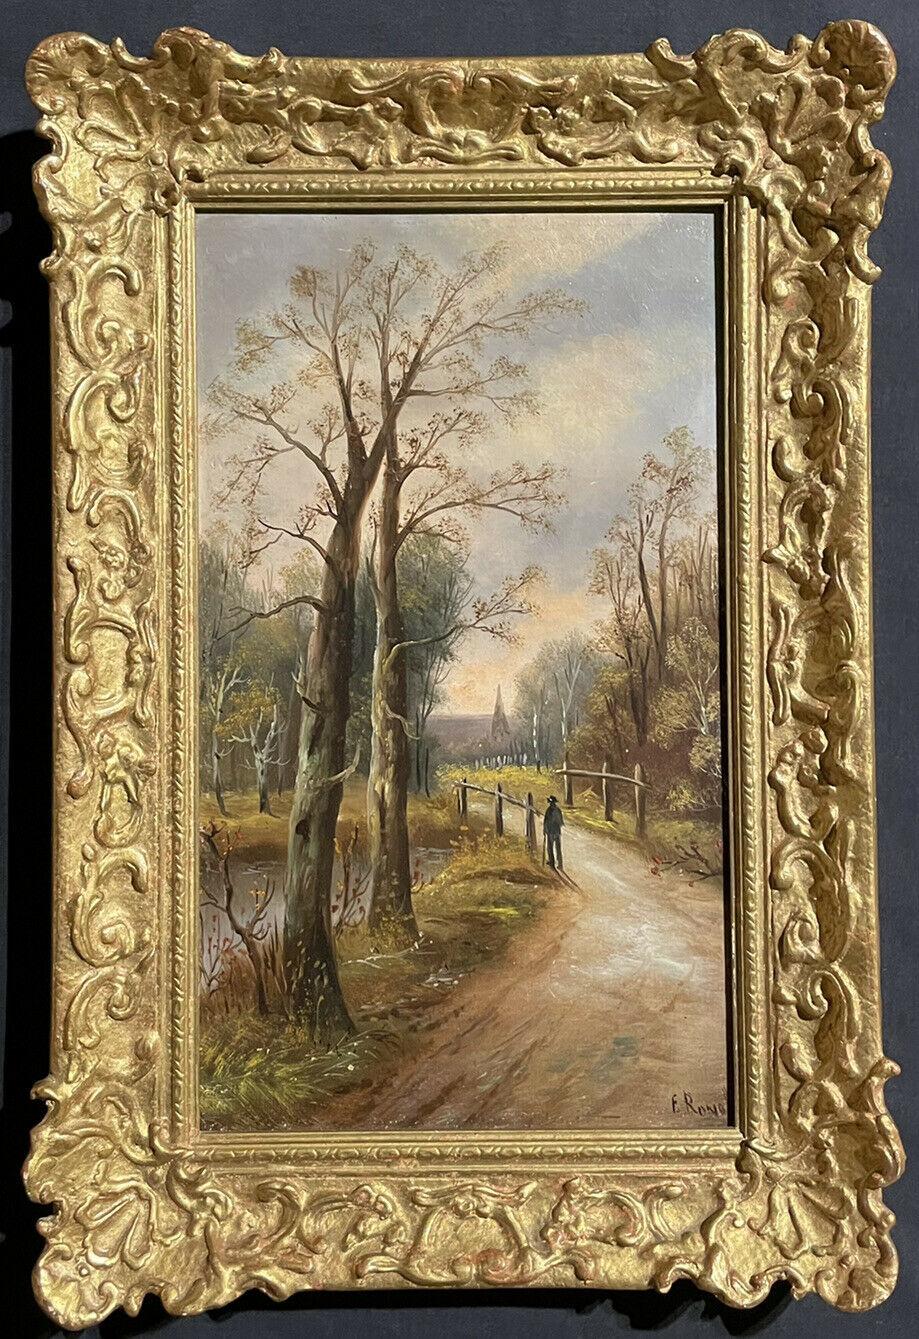 Unknown Landscape Painting - SIGNED VICTORIAN OIL PAINTING - FIGURE WALKING ALONG COUNTRY RURAL LANE - FRAMED